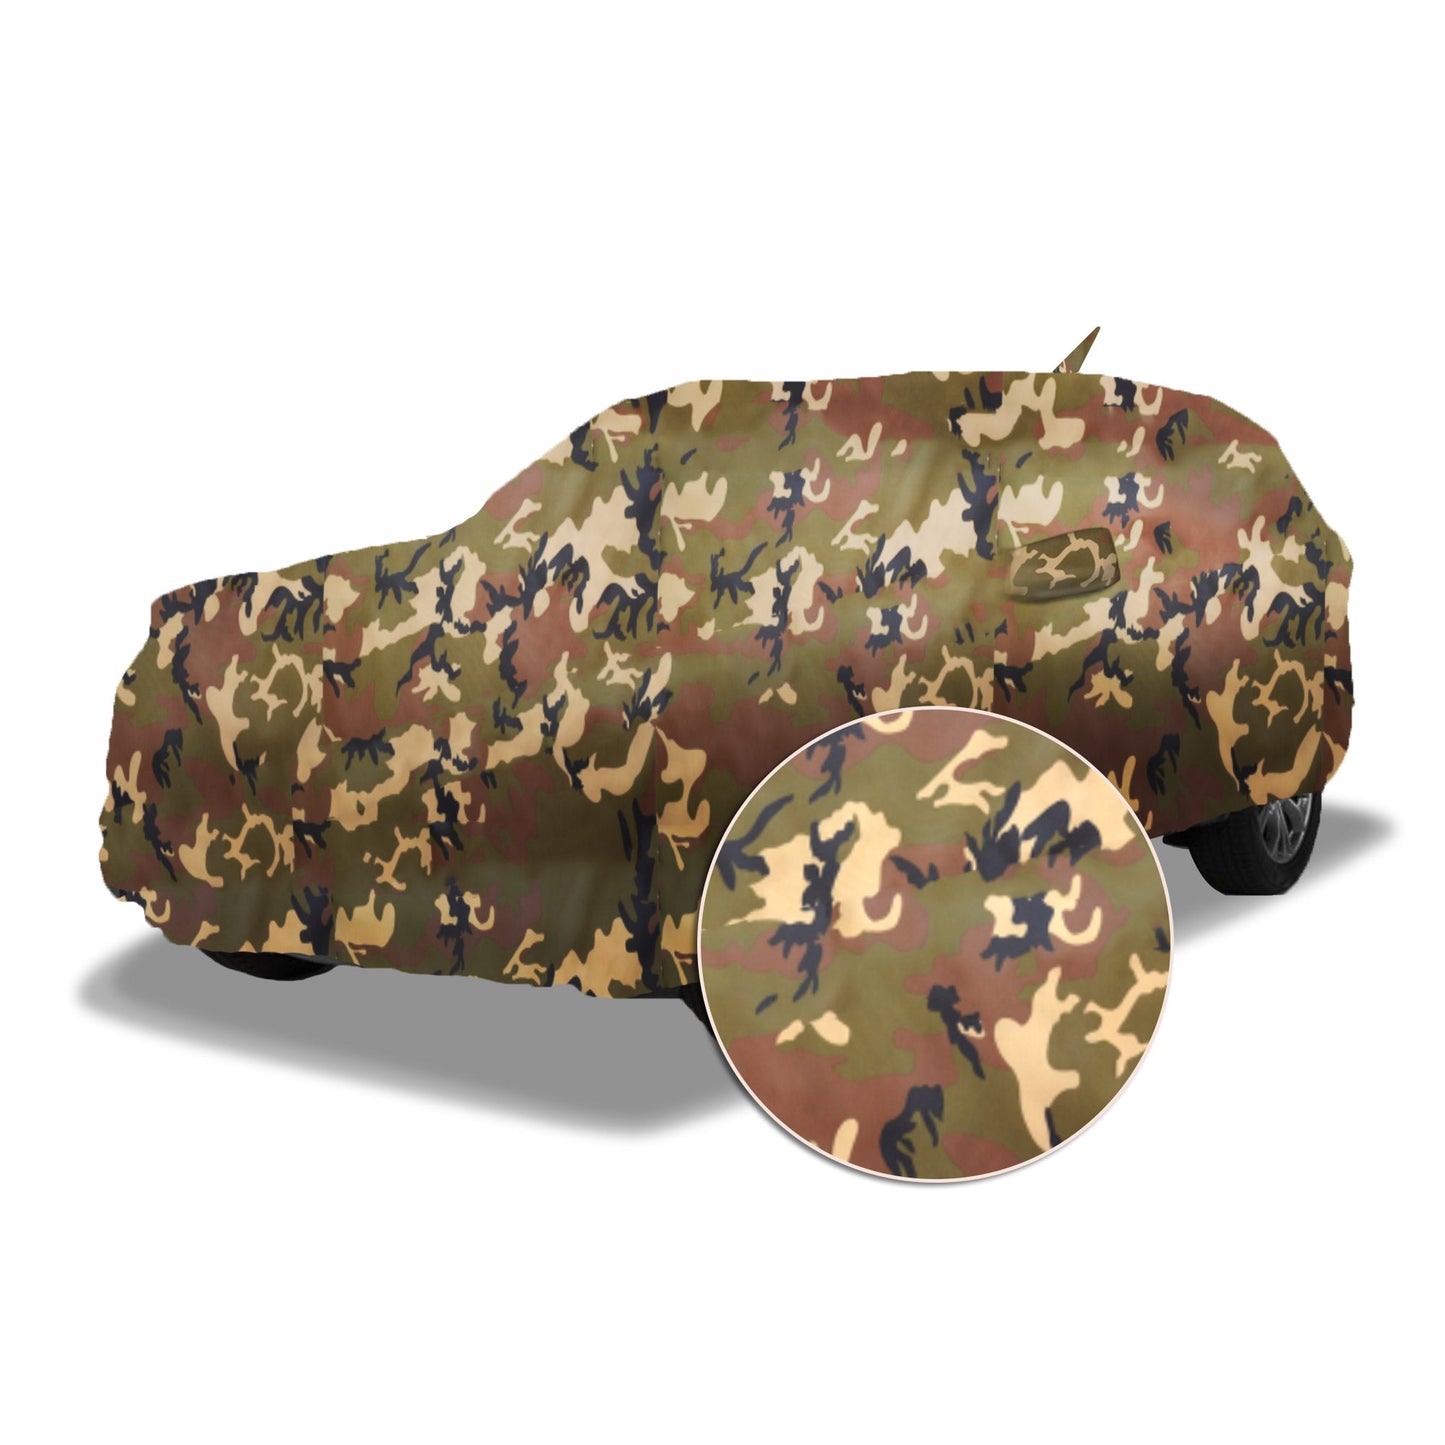 Ascot Volvo XC90 Car Body Cover Extra Strong & Dust Proof Jungle Military Car Cover with UV Proof & Water-Resistant Coating